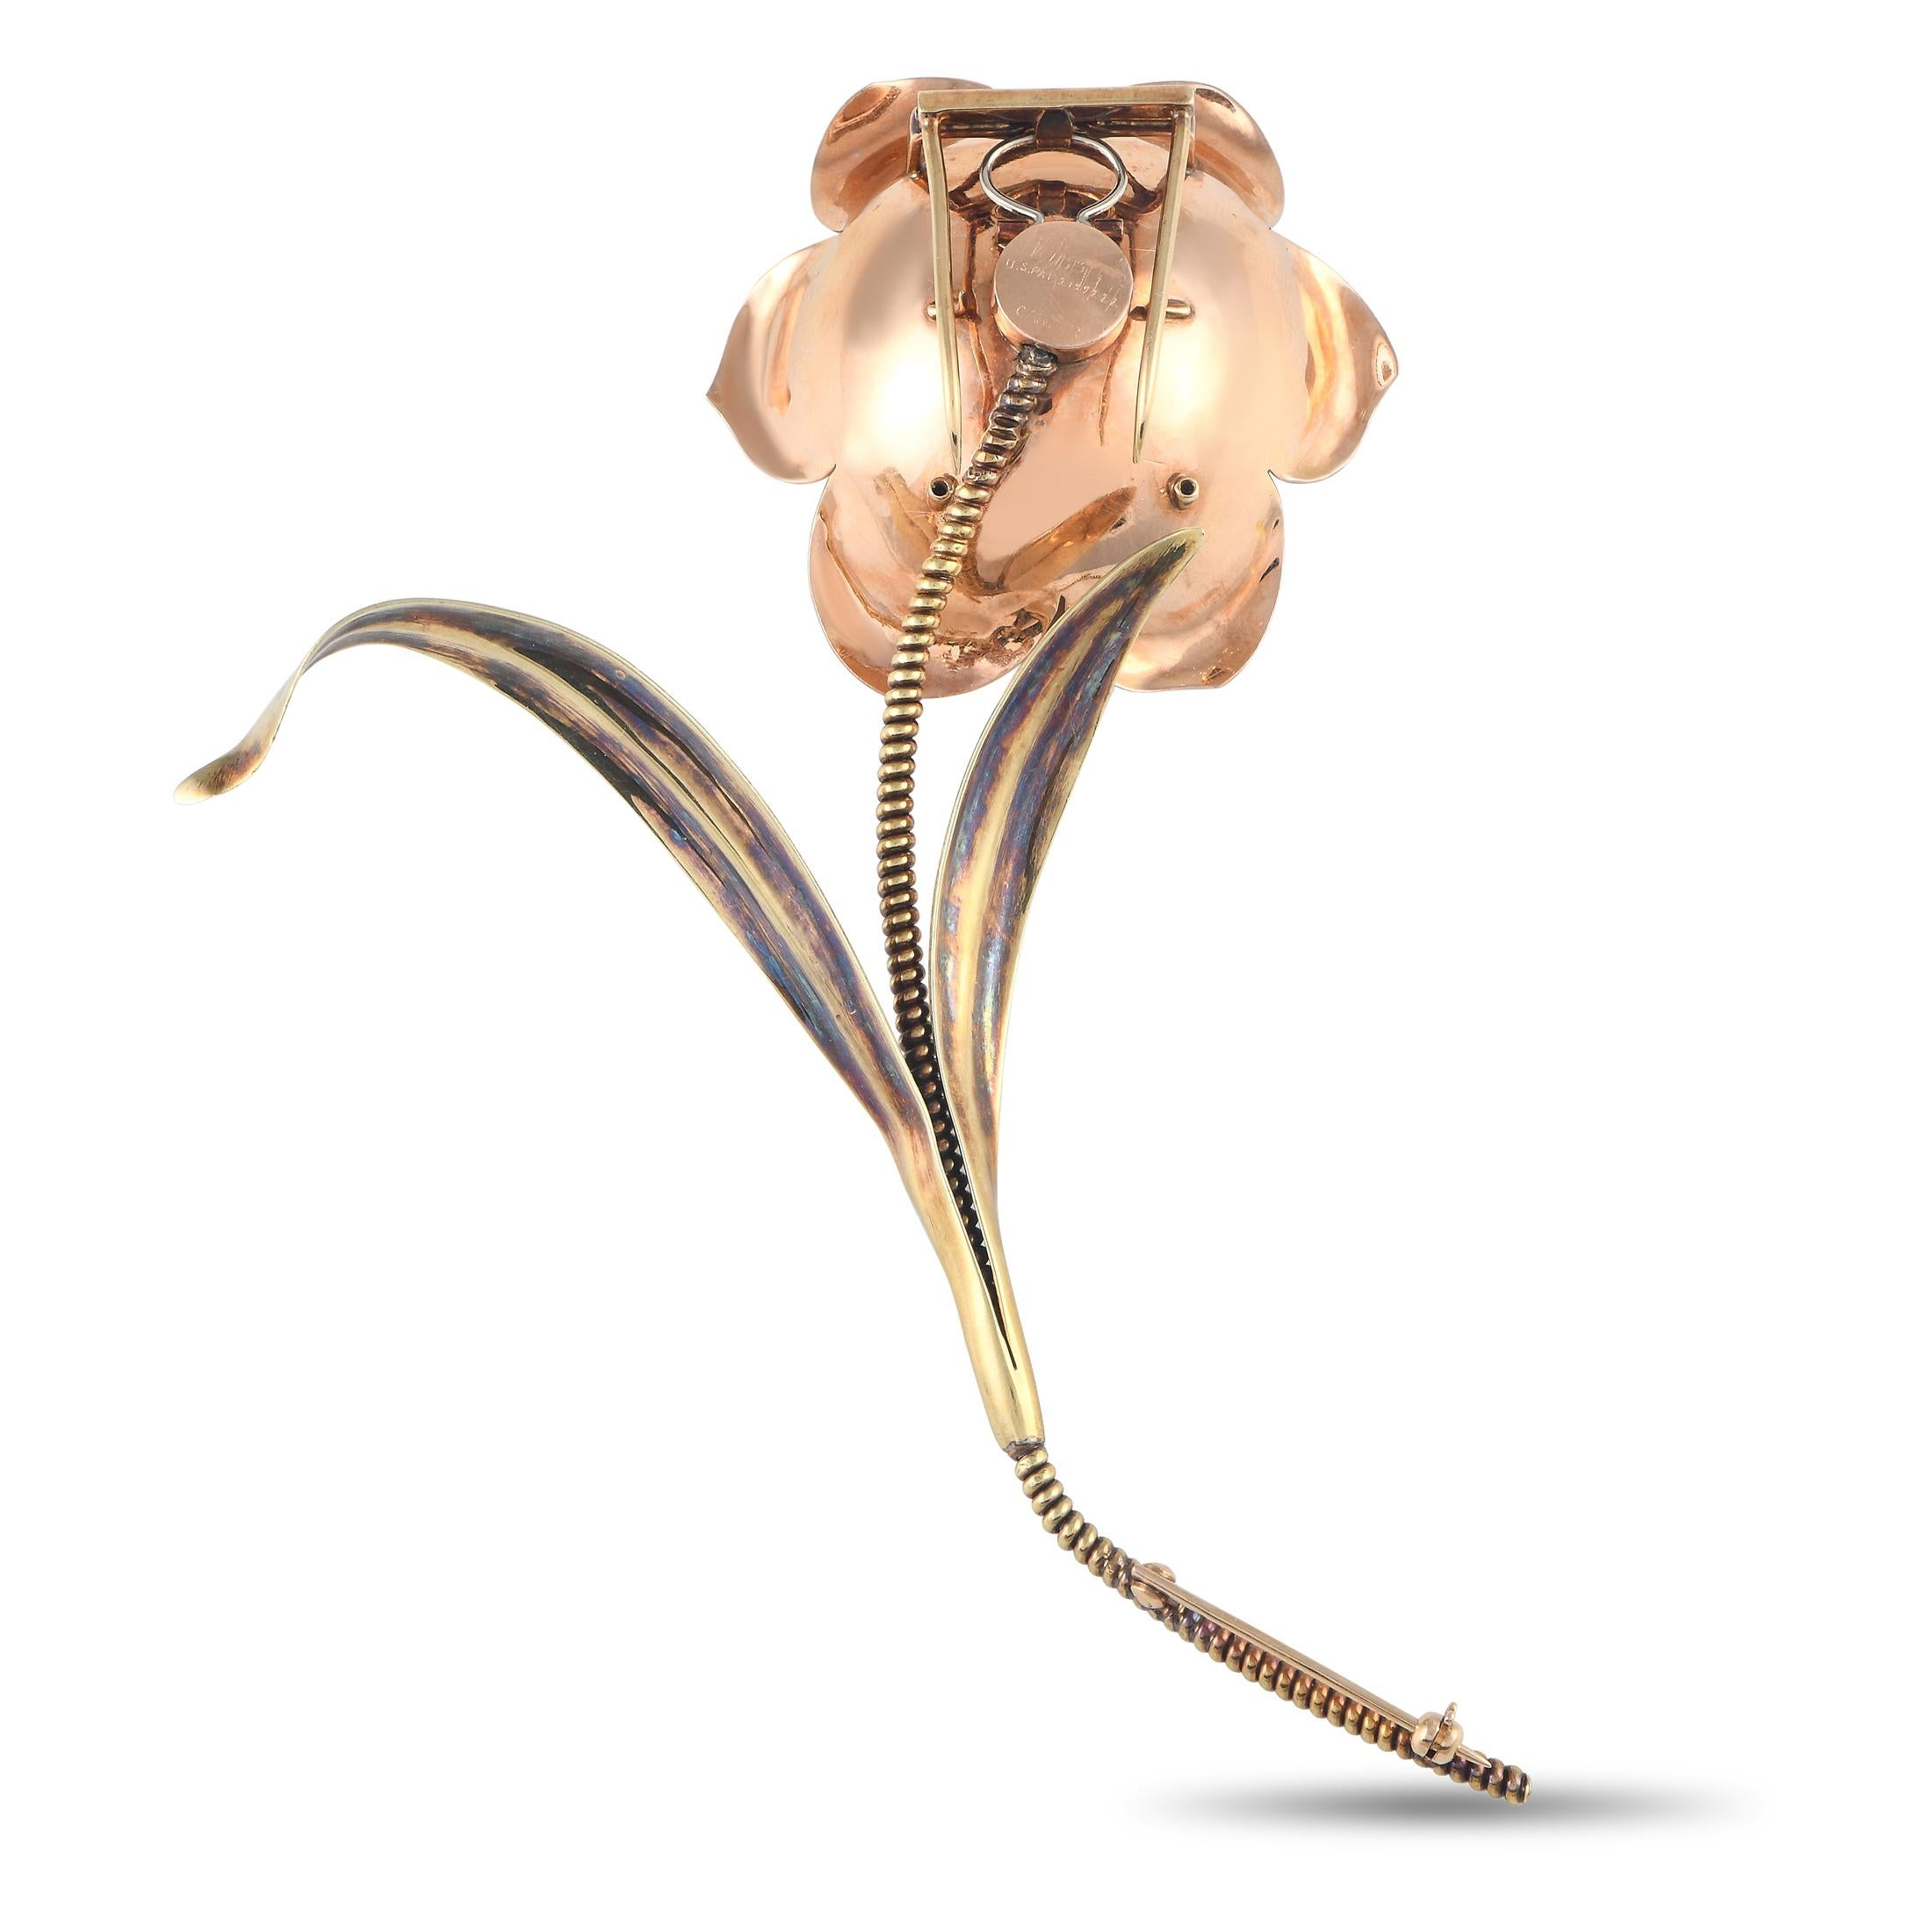 A blooming jewel to elevate your collection. This two-tone Cartier 'en tremblant' flower brooch features a rose gold blossom with a citrine cabochon on four prongs, punctuated by a trio of diamonds. The captivating bloom is held by an unusual